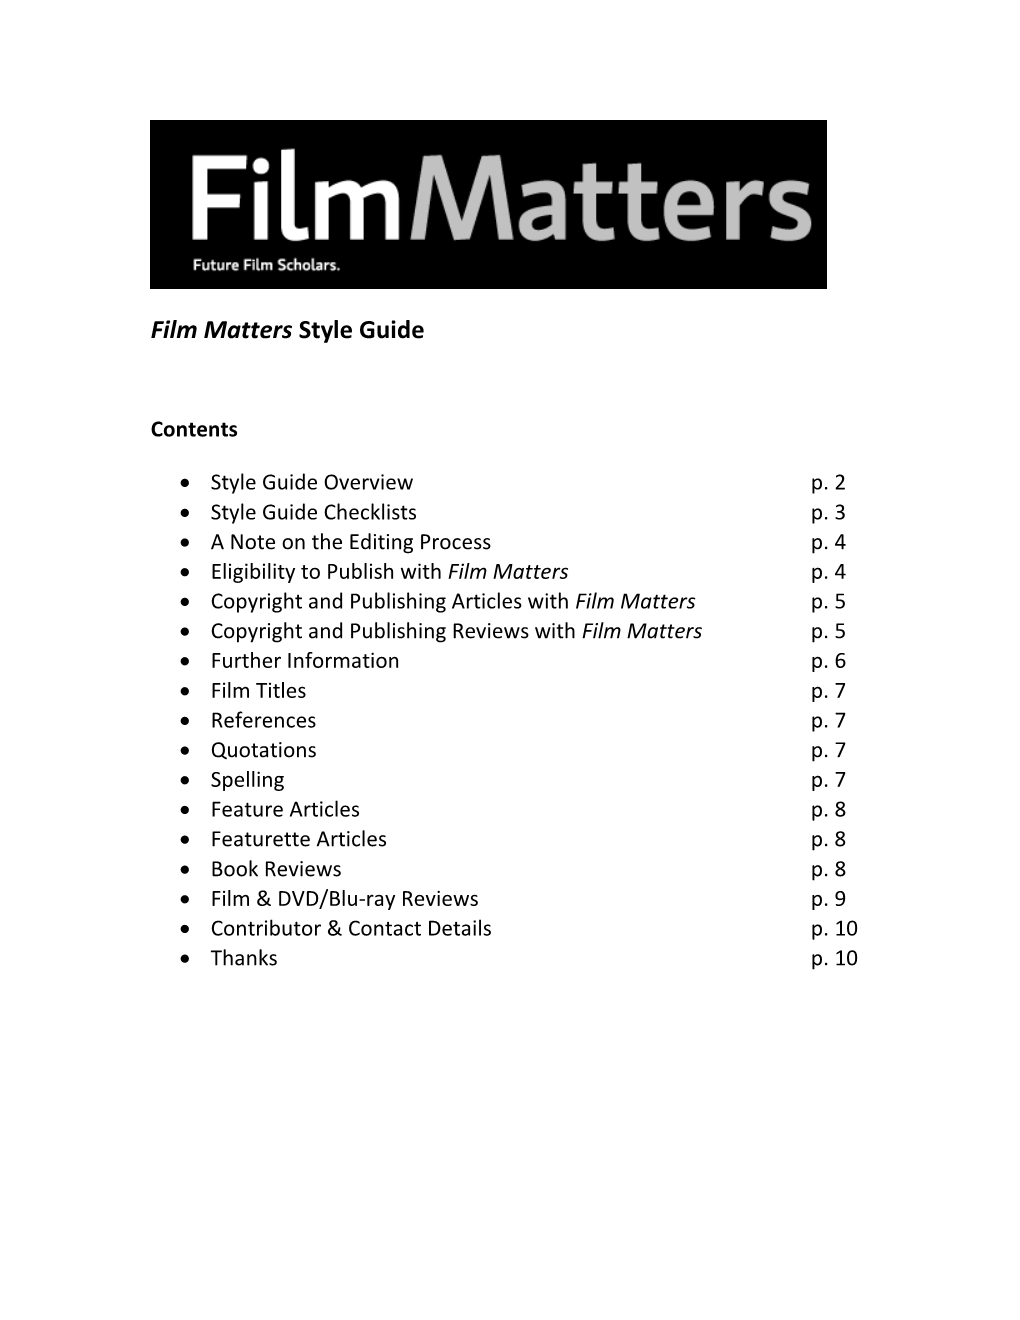 Film Matters Style Guide